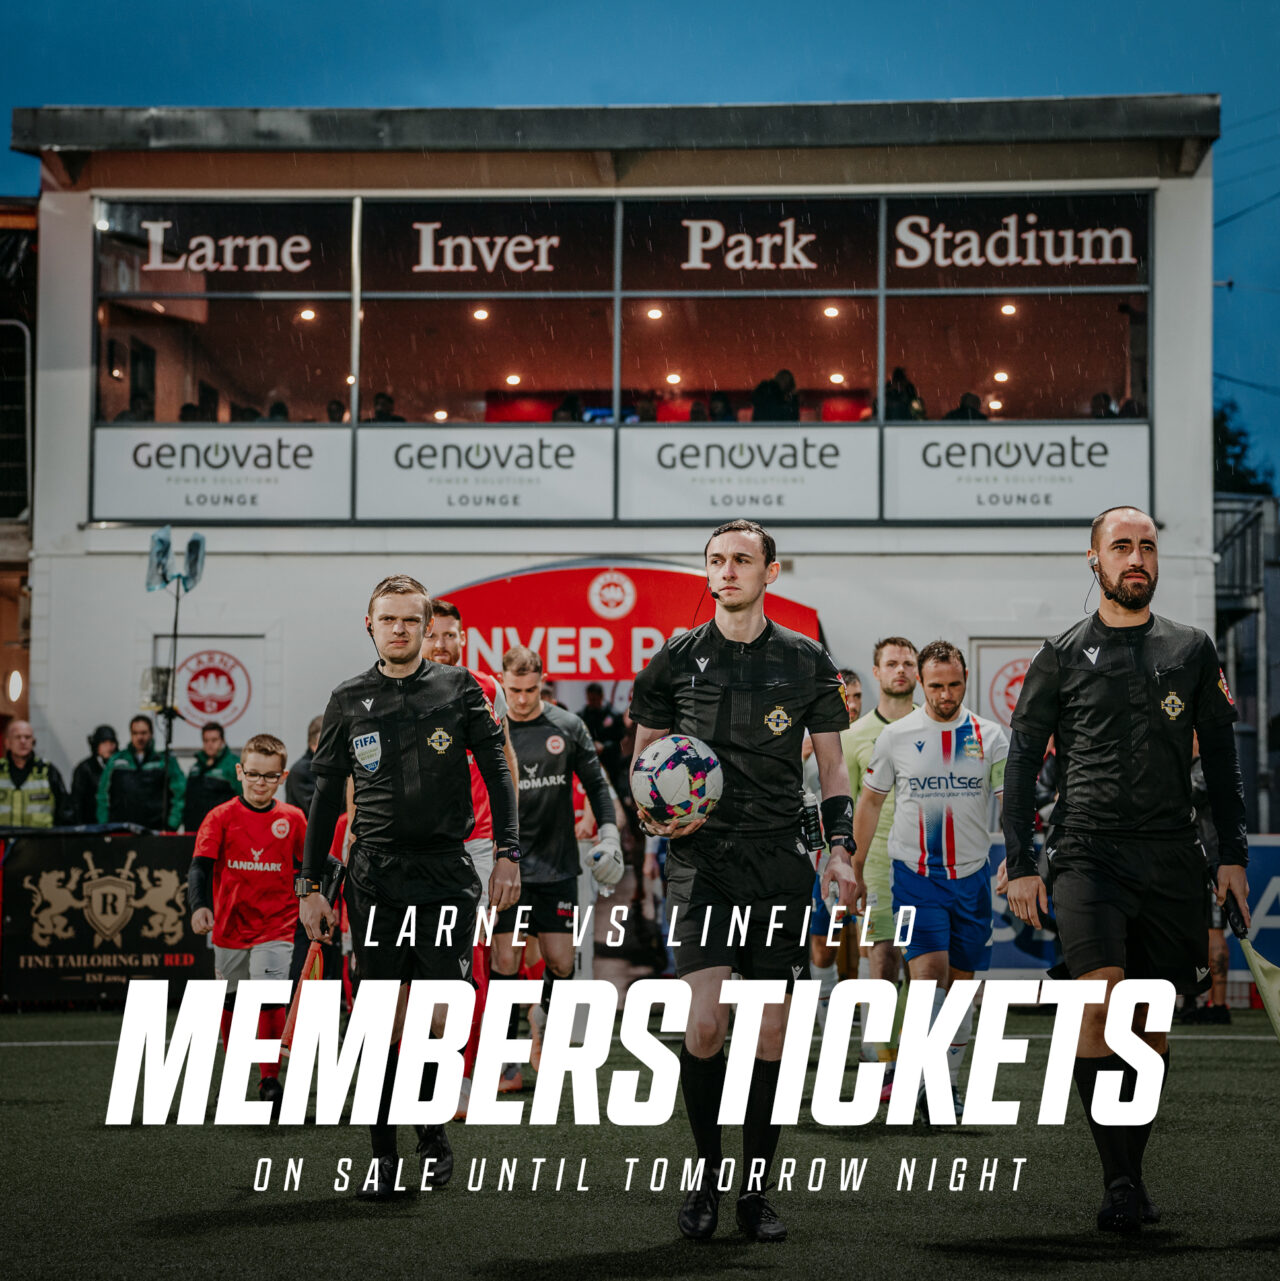 Larne Tickets for Members